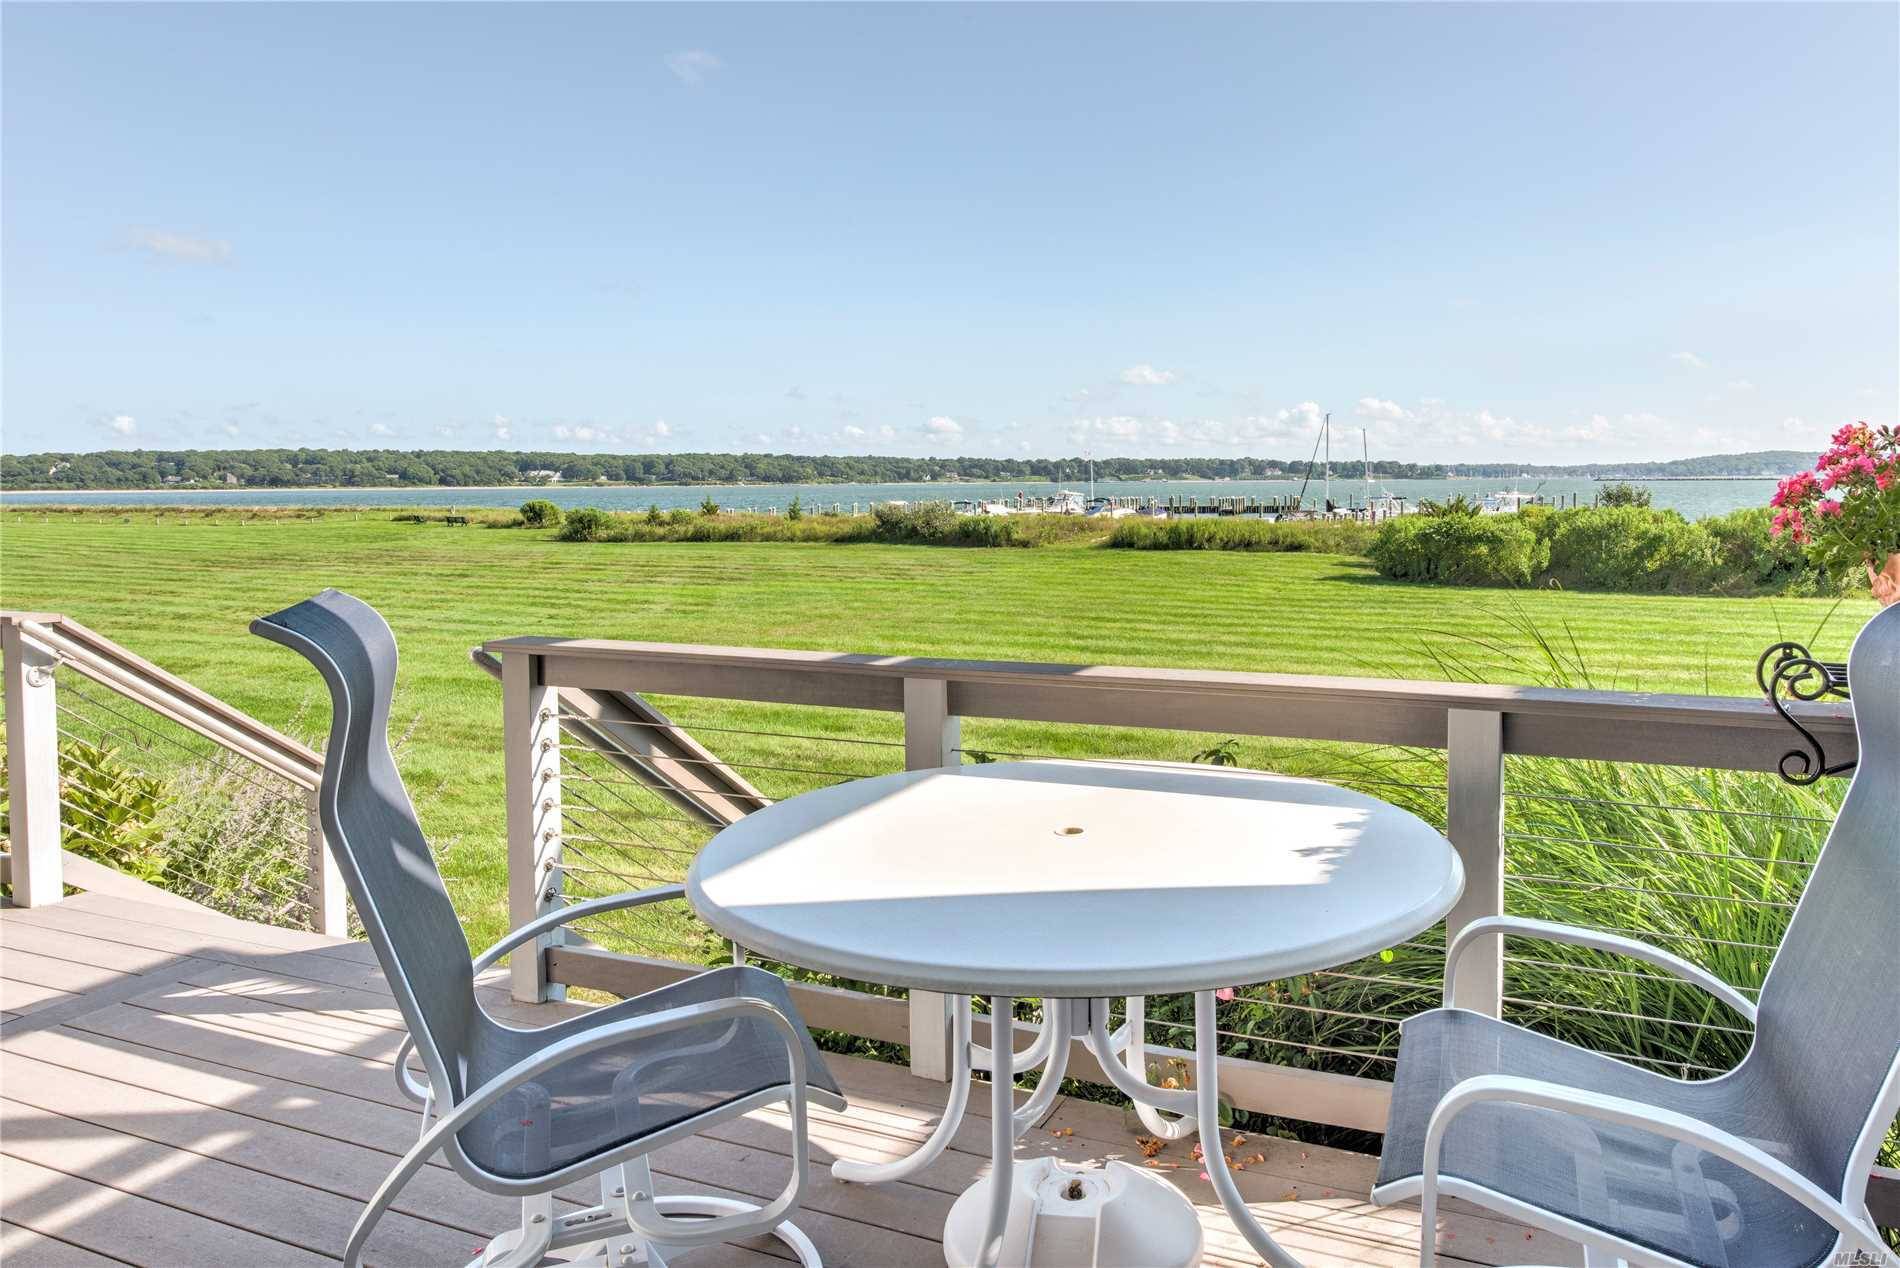 Bay Front Condo Living At Its Best In This Turn-Key Renovated Townhouse.